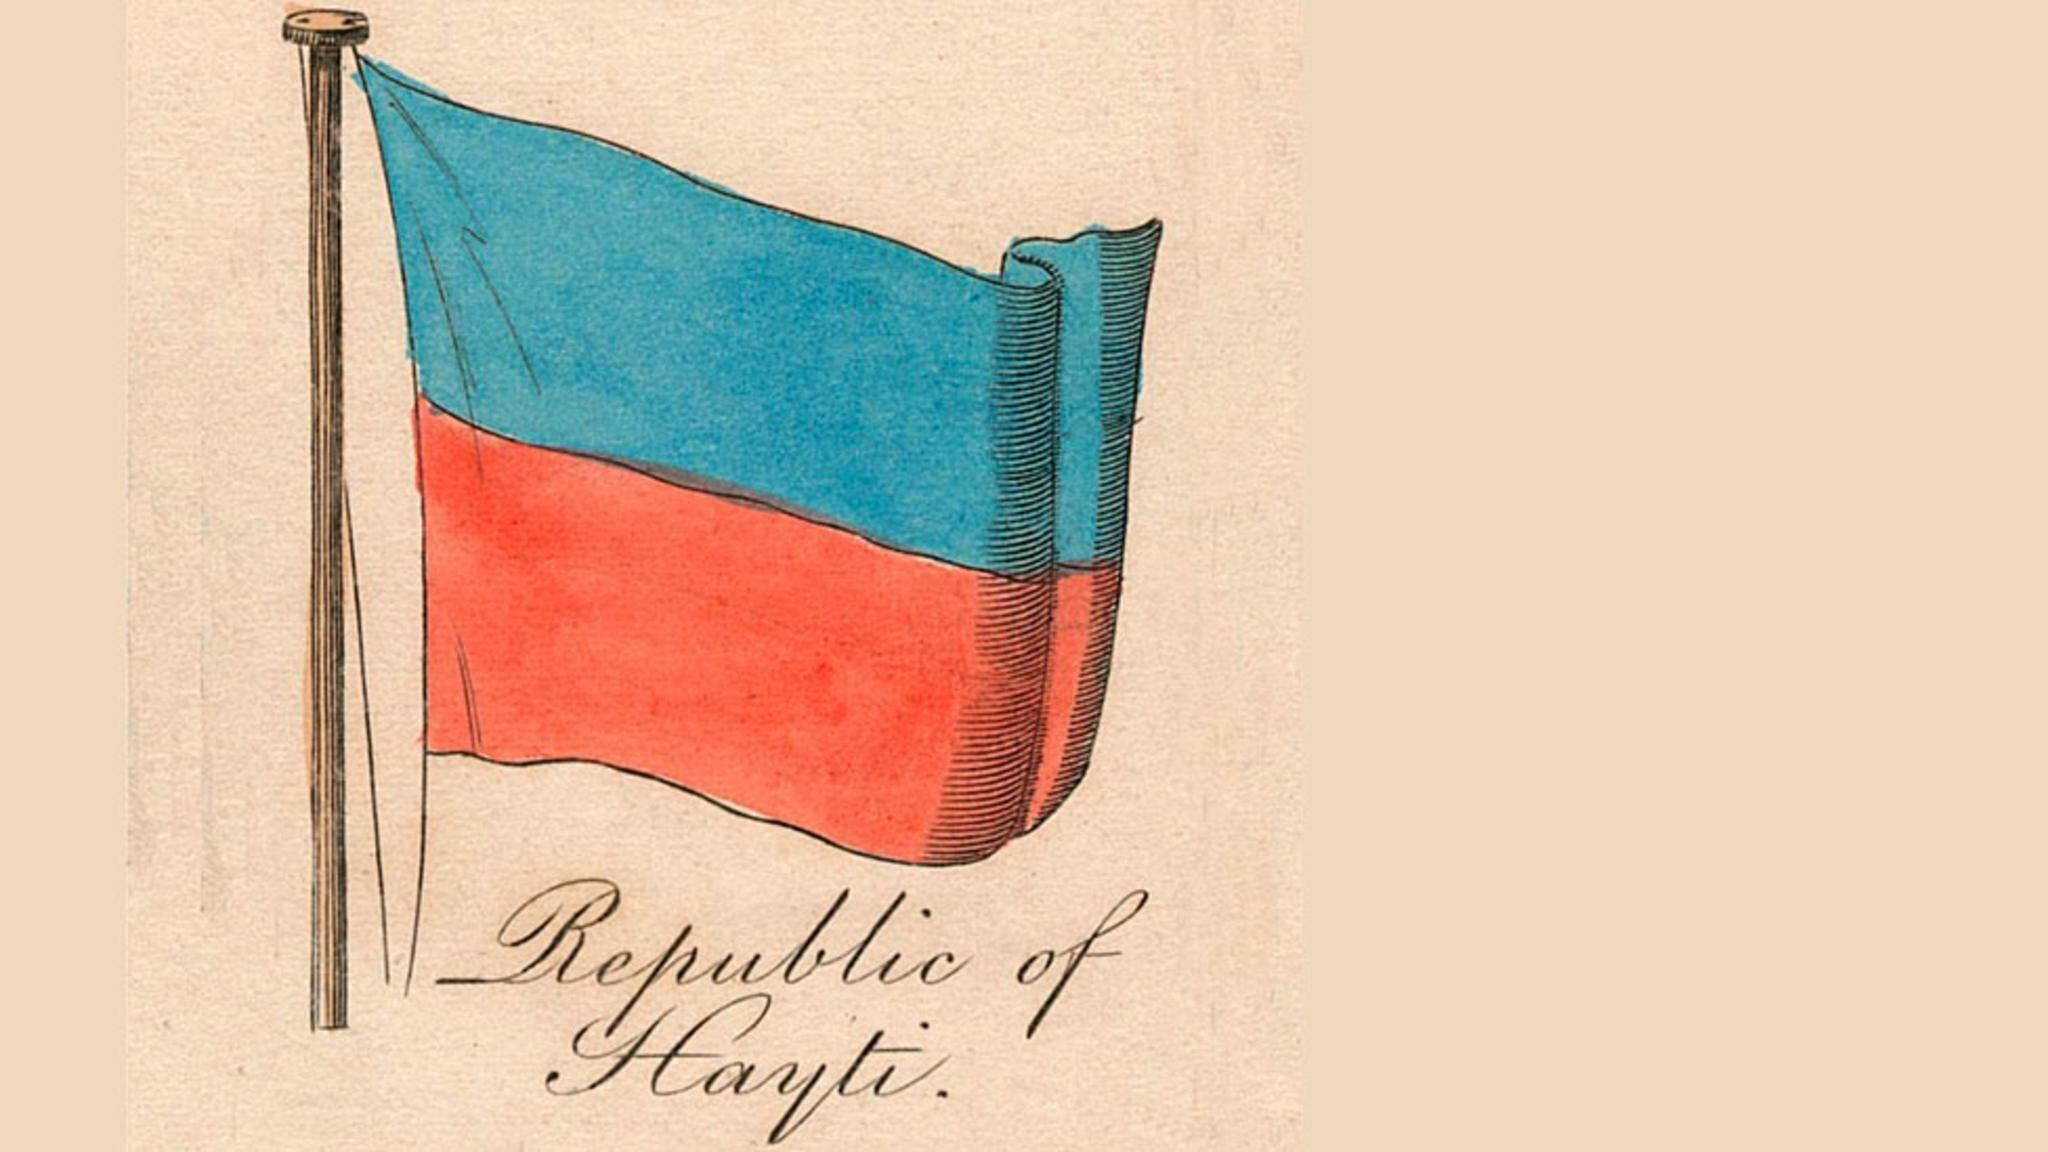 Design of the flag from 1838, when the country was already irremediably in debt.  (GET IMAGES).